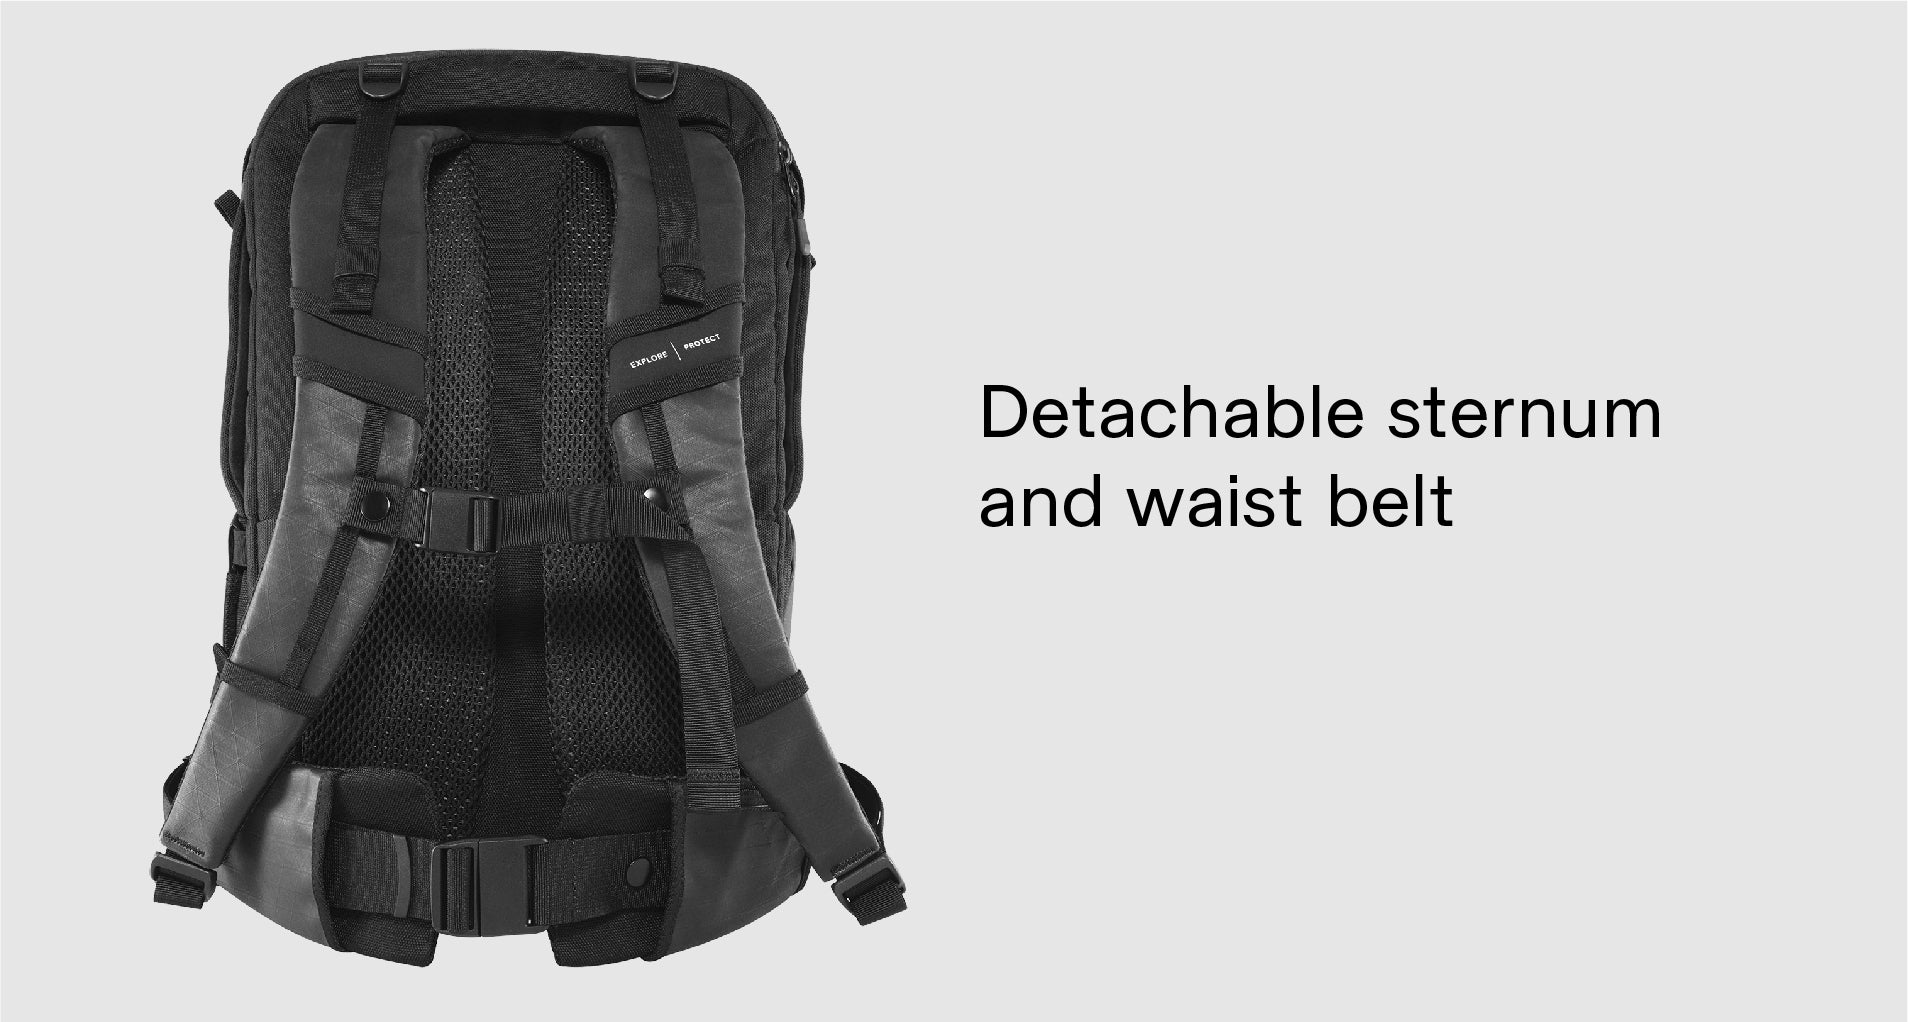 Groundtruth Backpack detachable sternum and waist belt